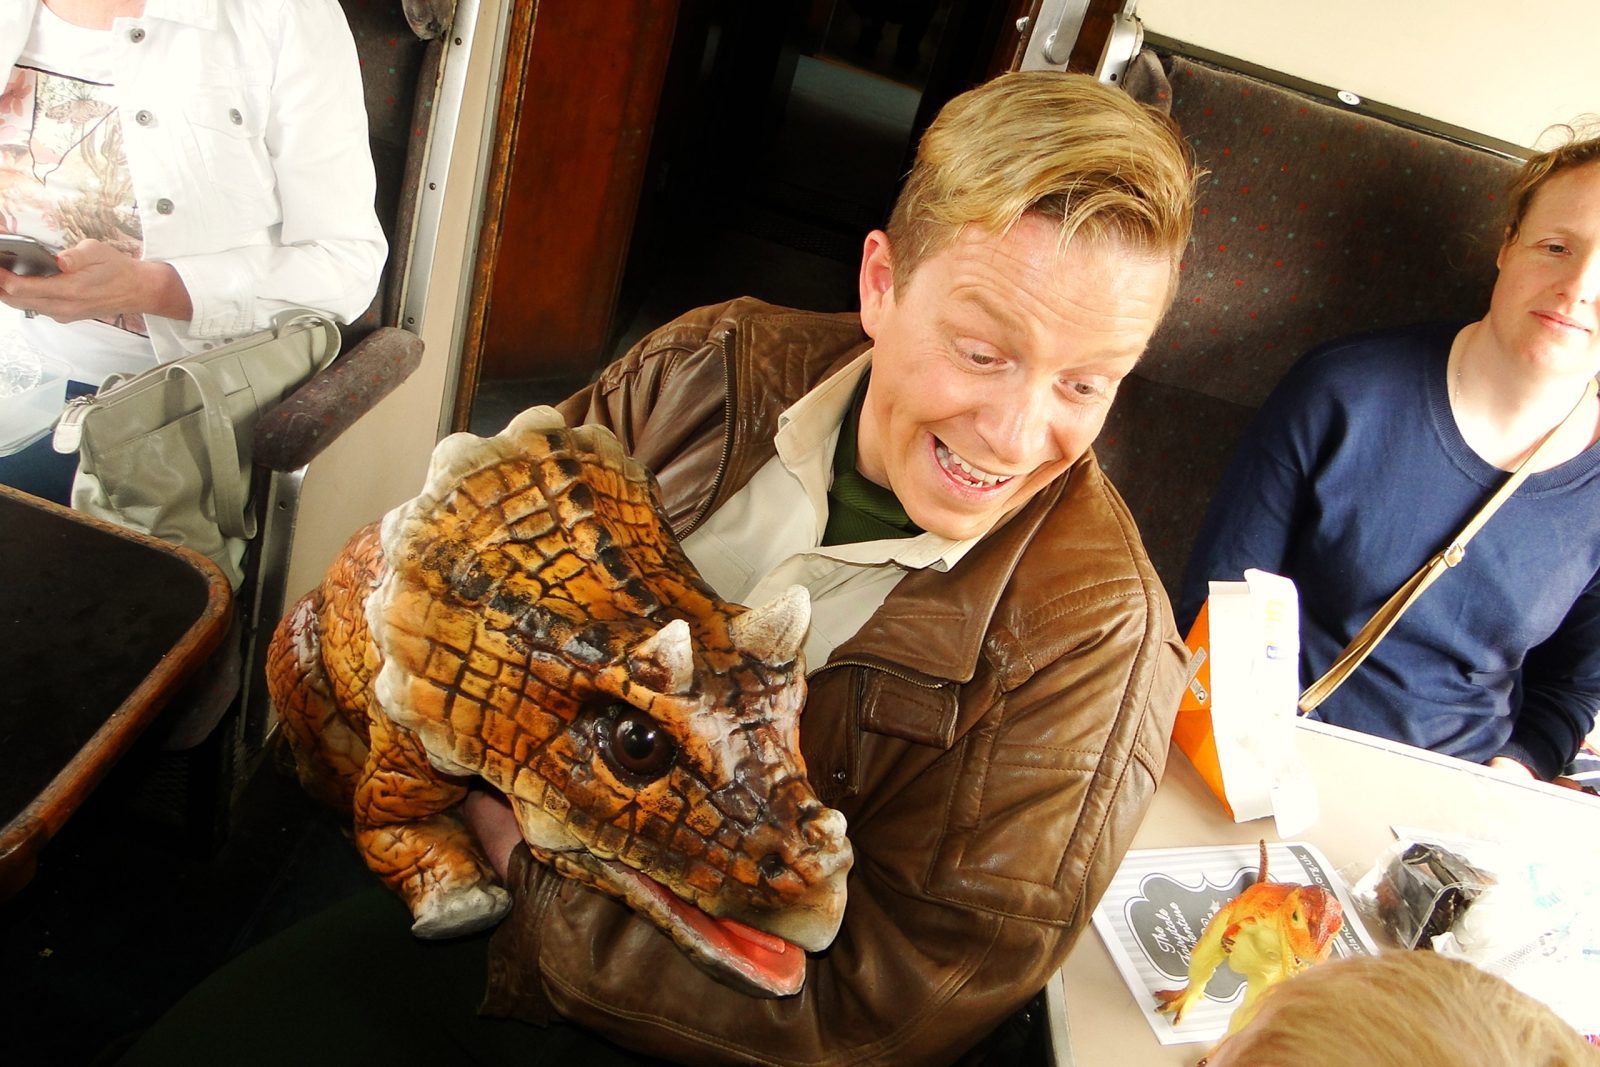 Dinosaur fans can go on a &#8216;roarsome&#8217; steam train ride through Greater Manchester, The Manc